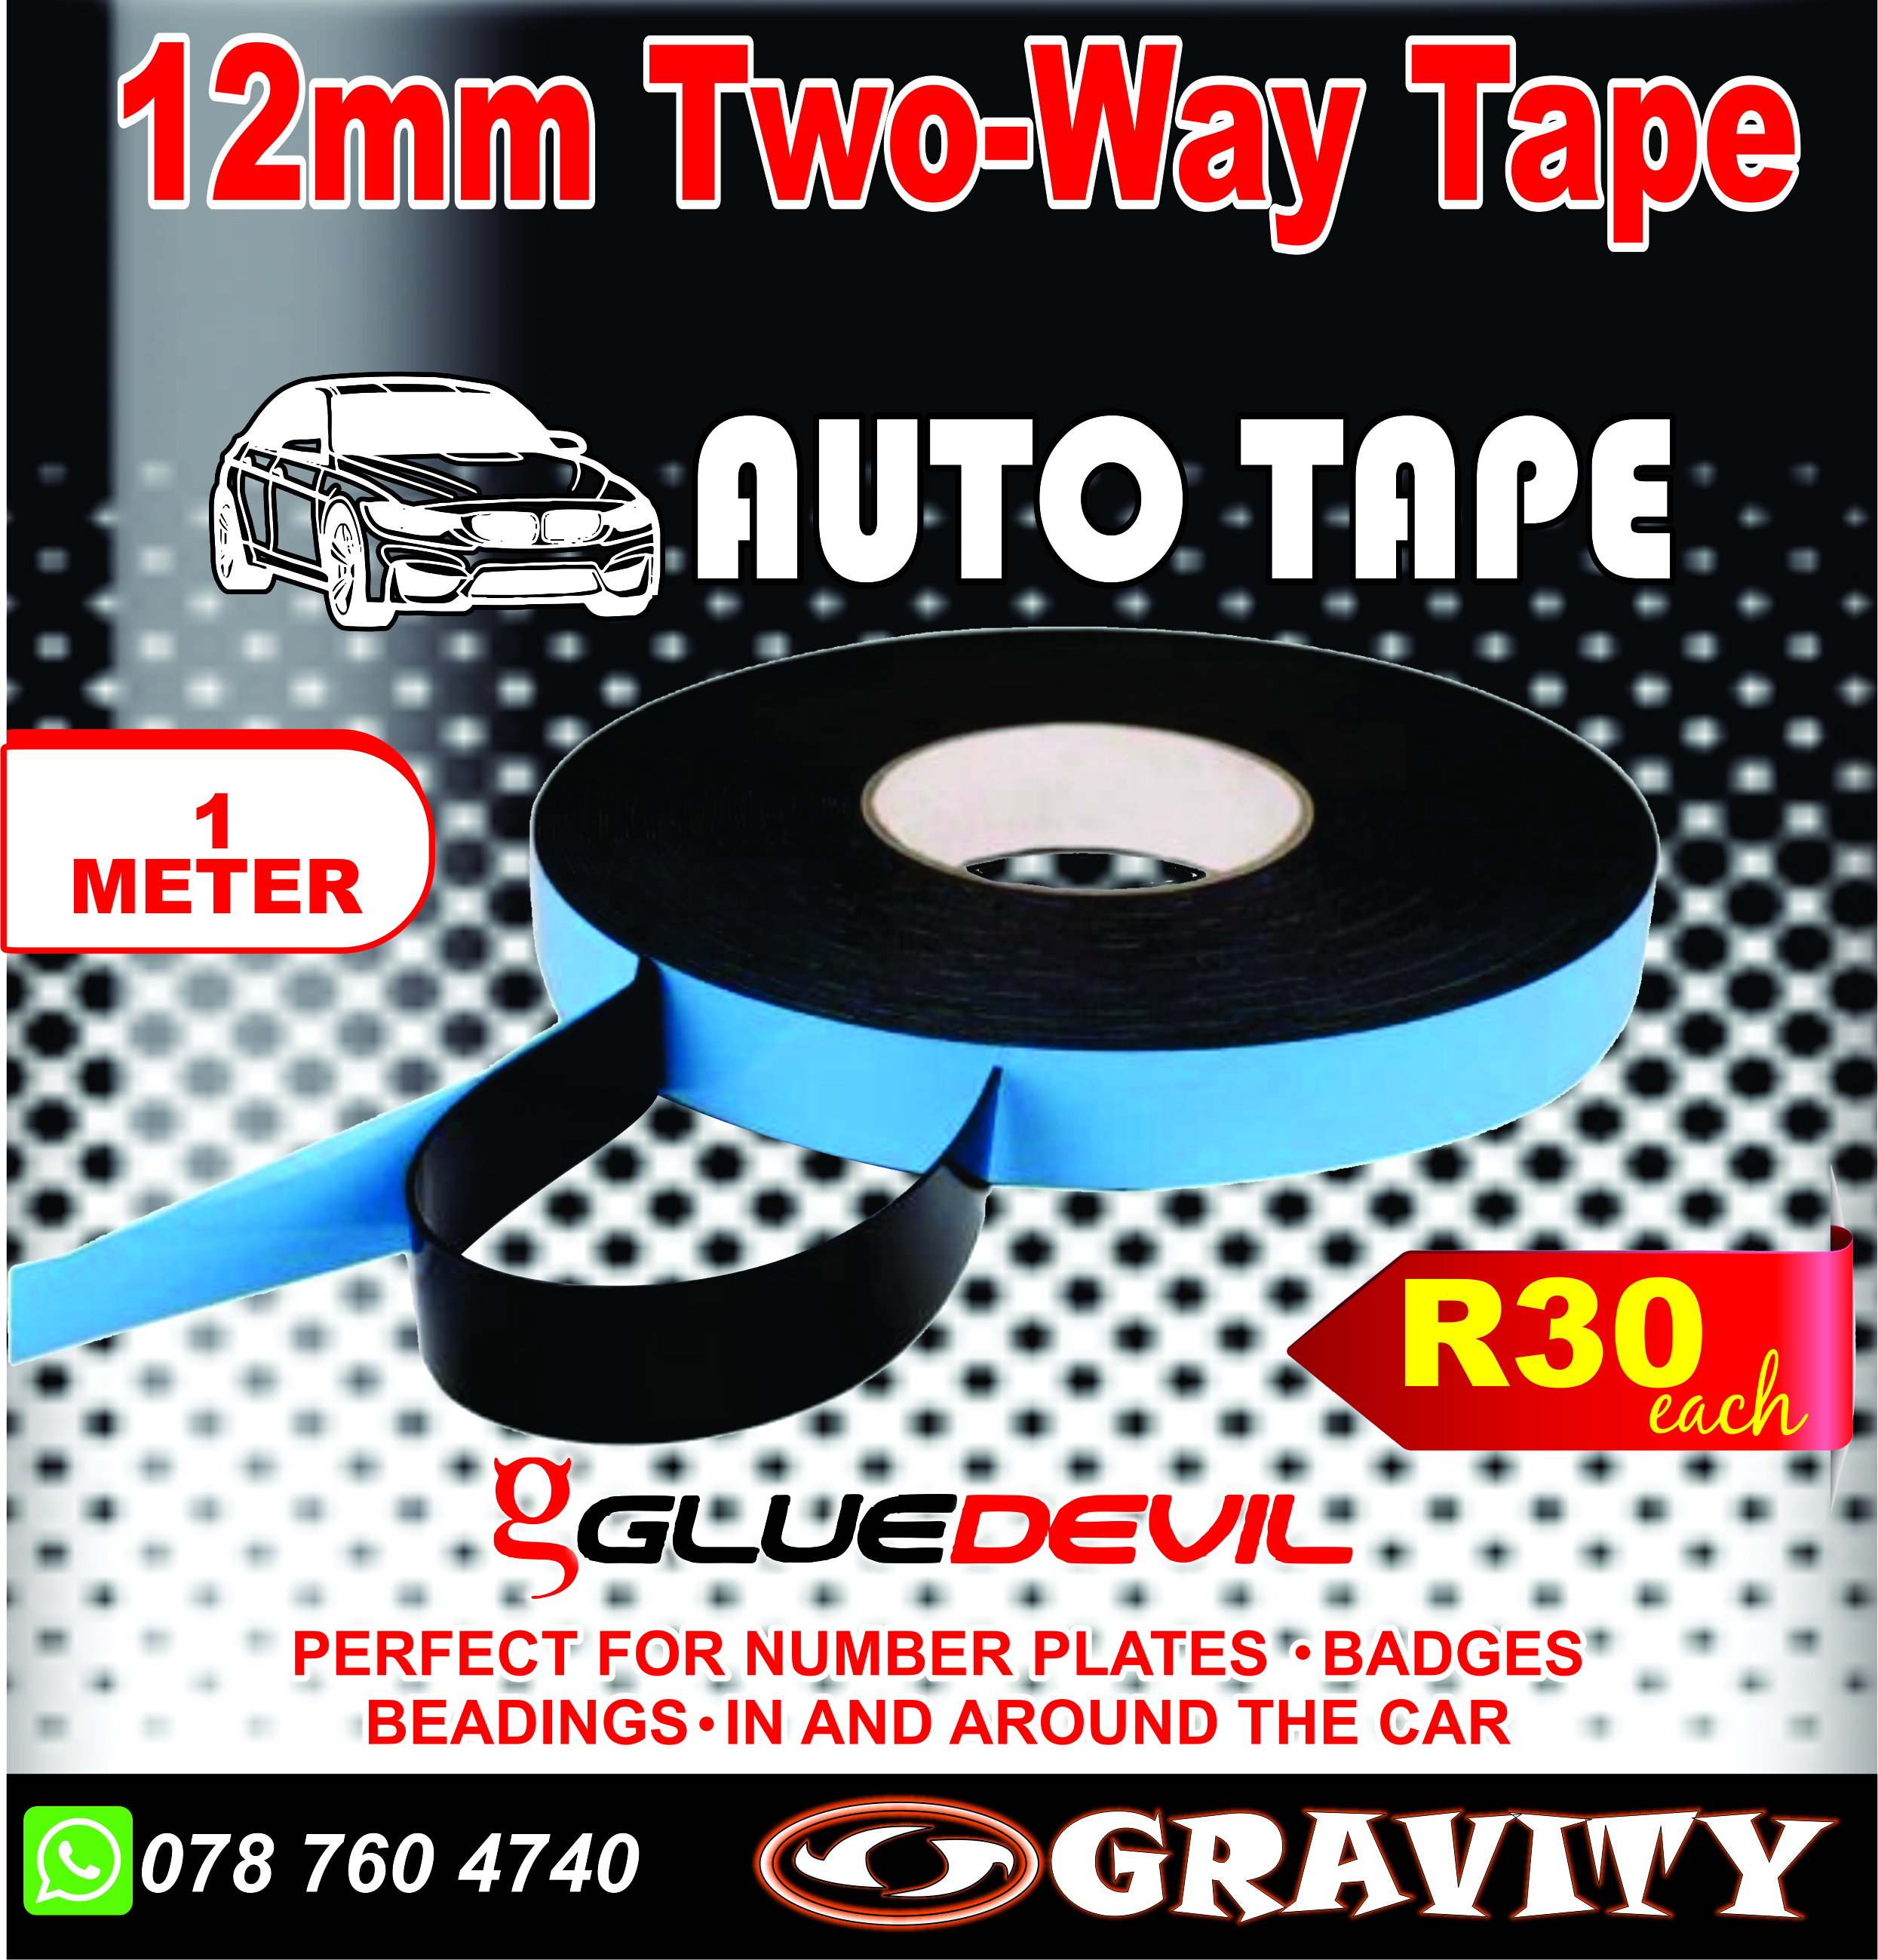 3m two way tape